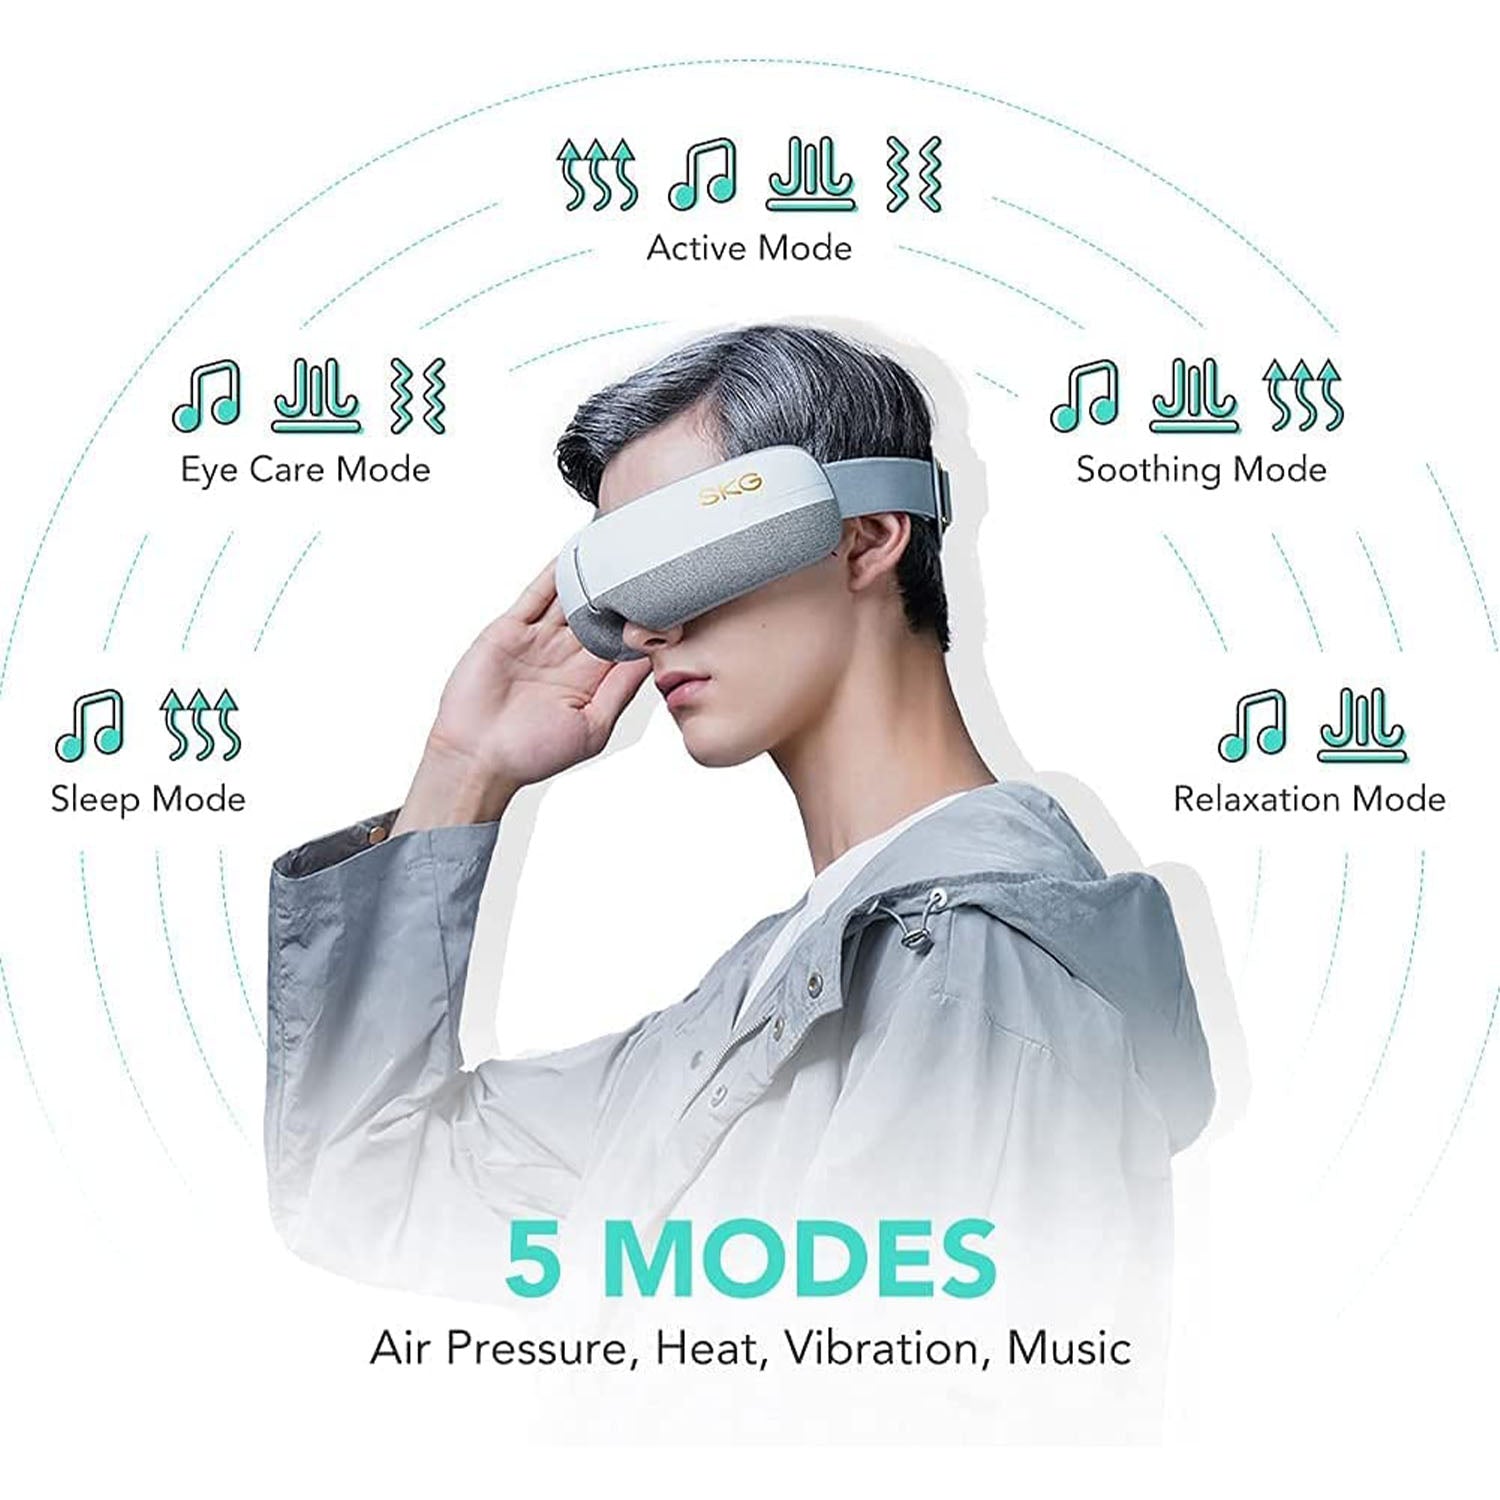 SKG E3 Eye Massager with Heat for Migraines - SKG